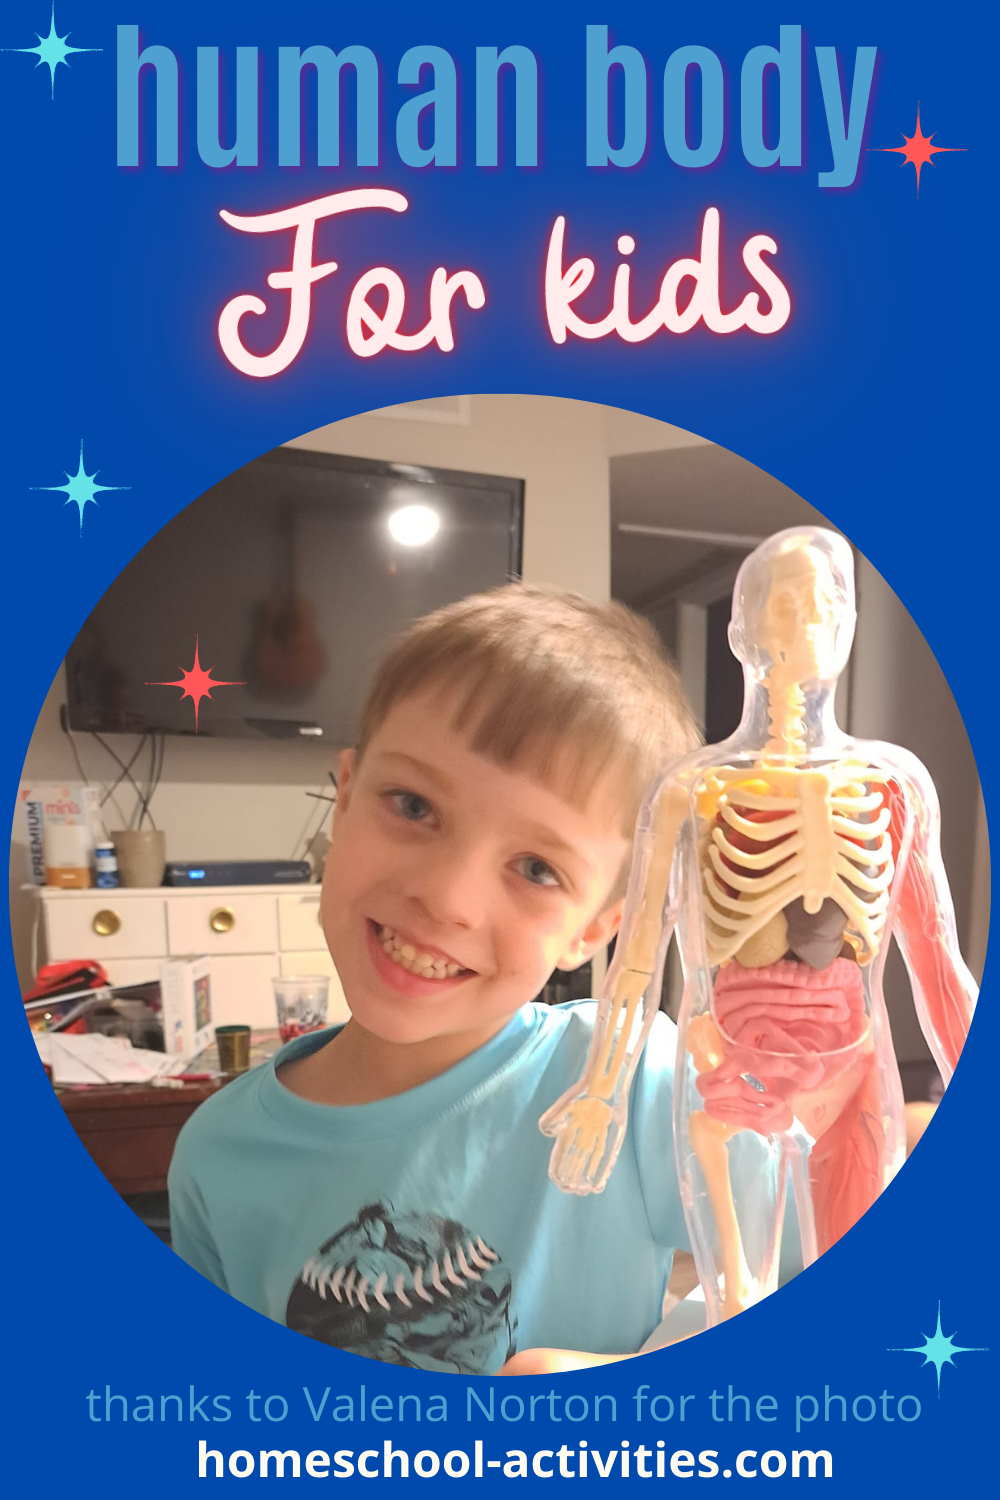 Homeschool Unit Study on the human body for kids with fun activities